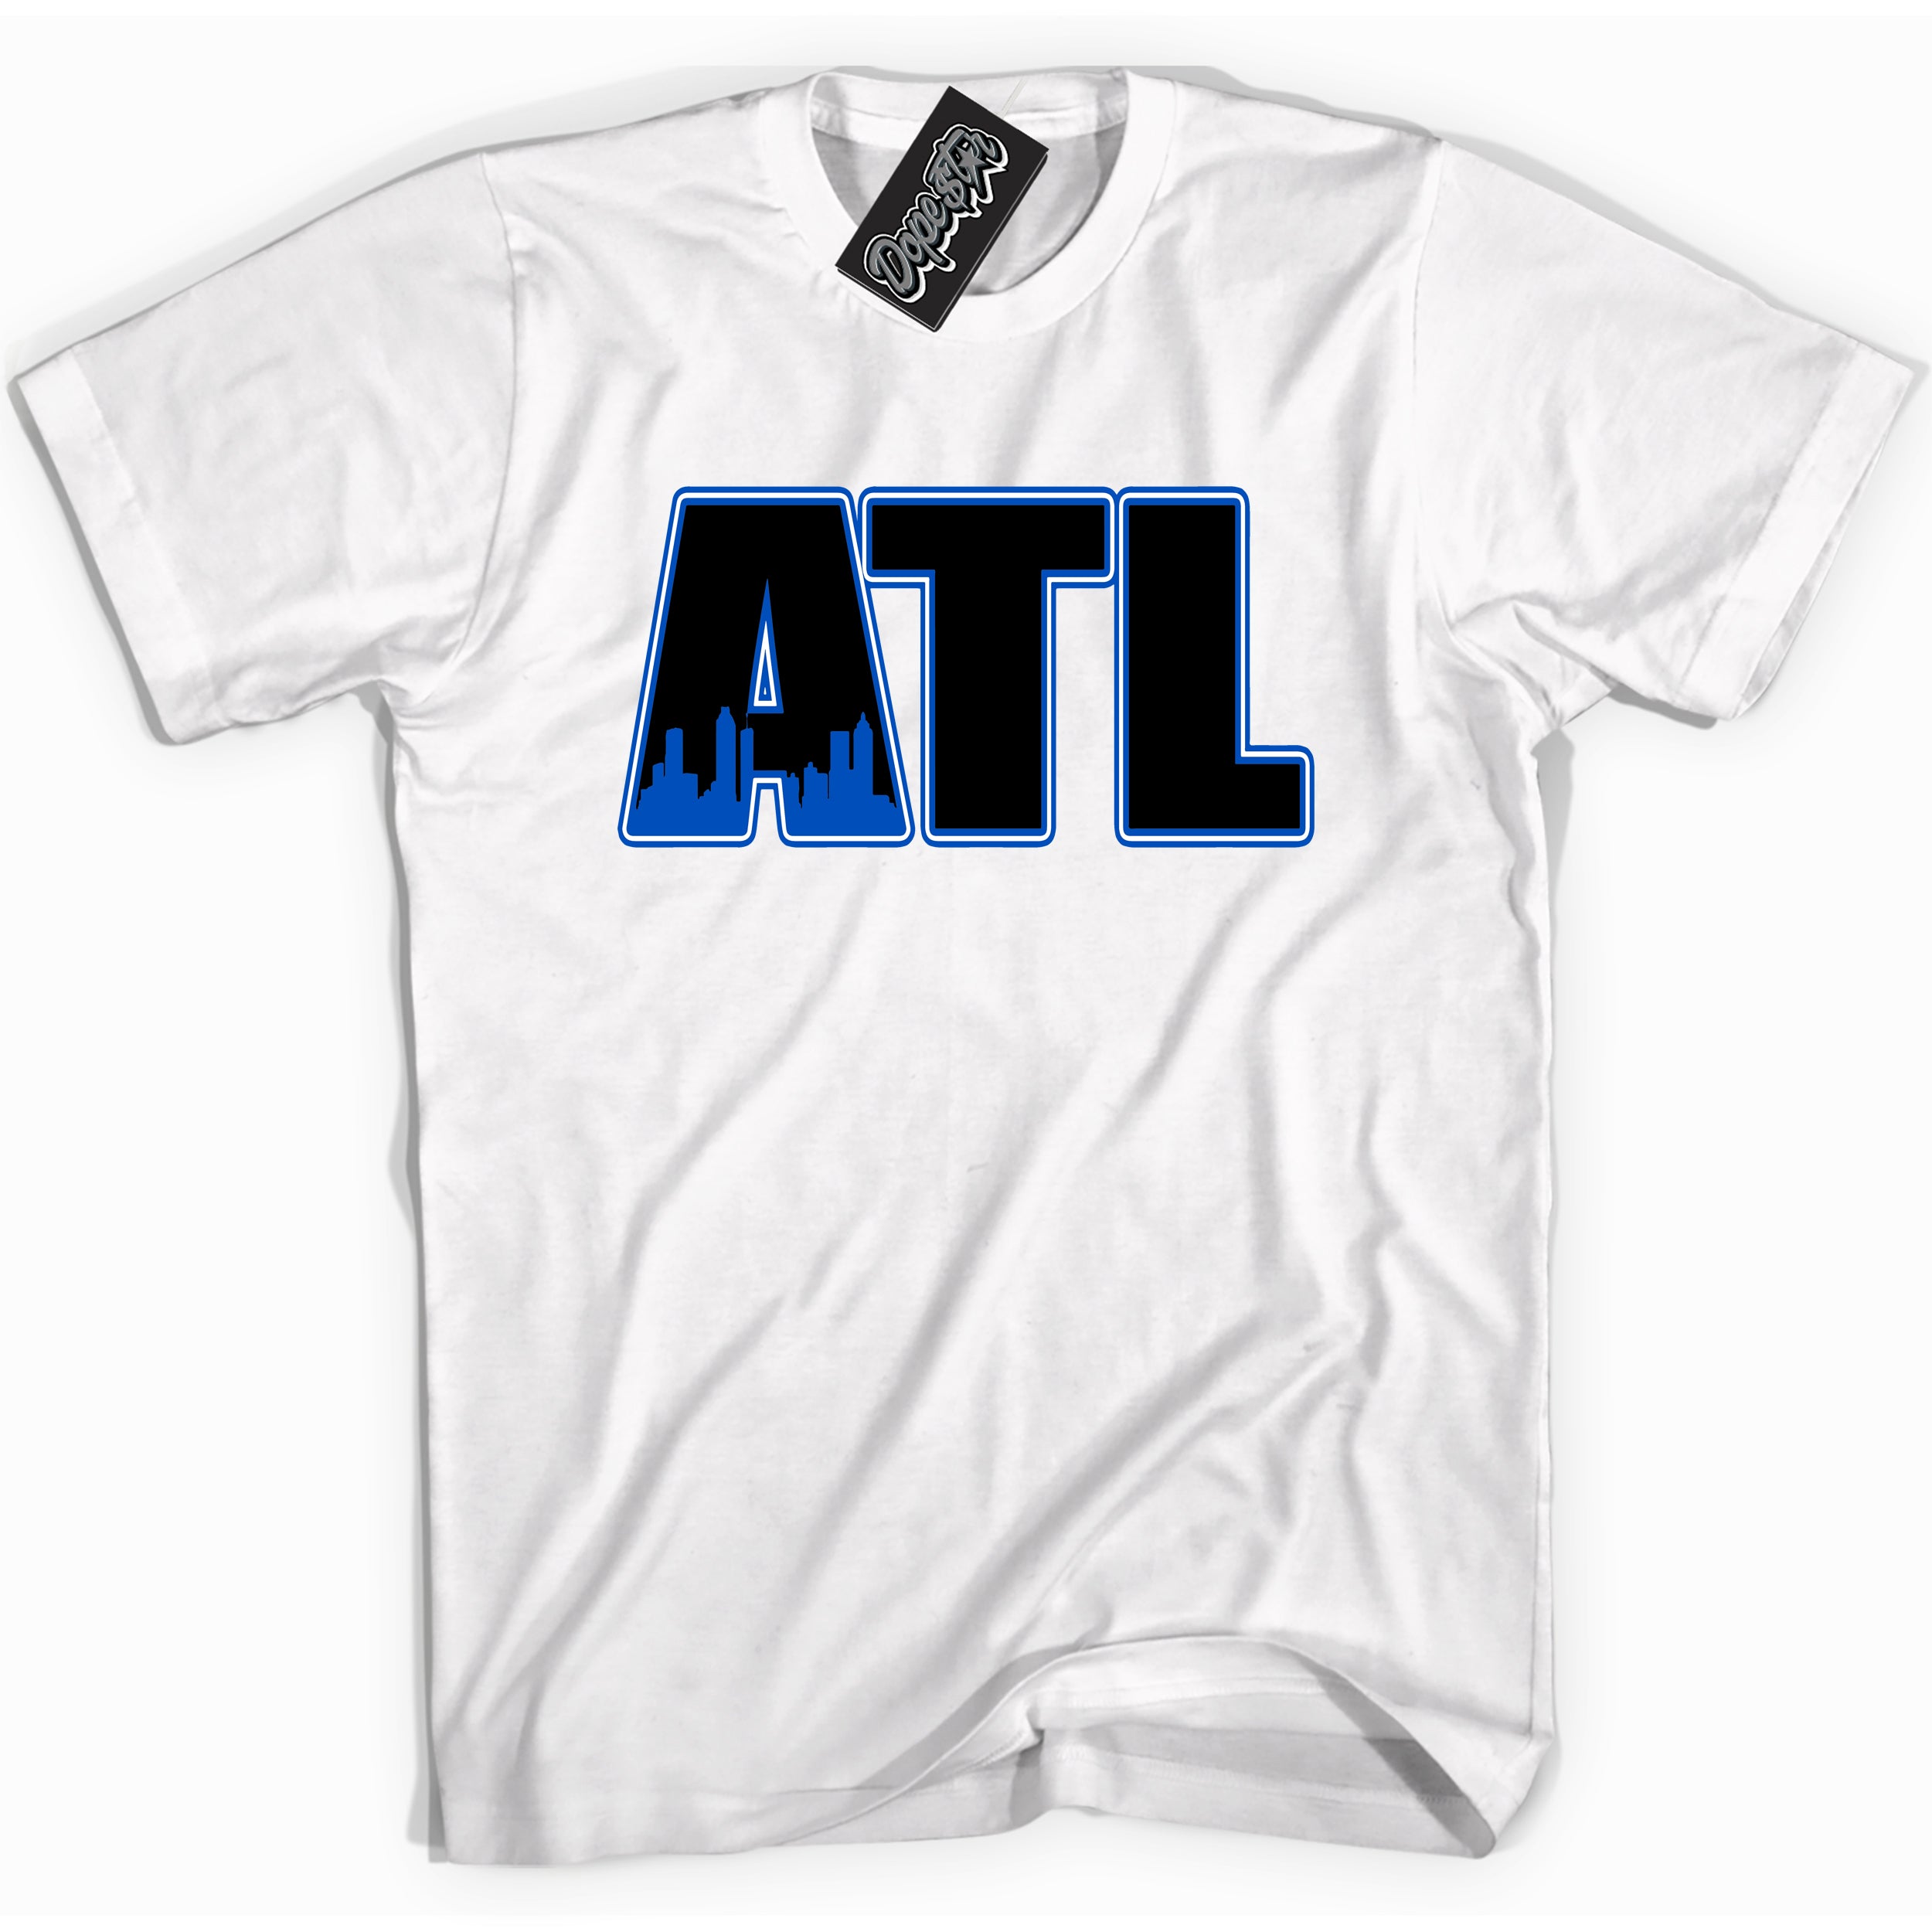 Cool White graphic tee with "Atlanta" design, that perfectly matches Royal Reimagined 1s sneakers 